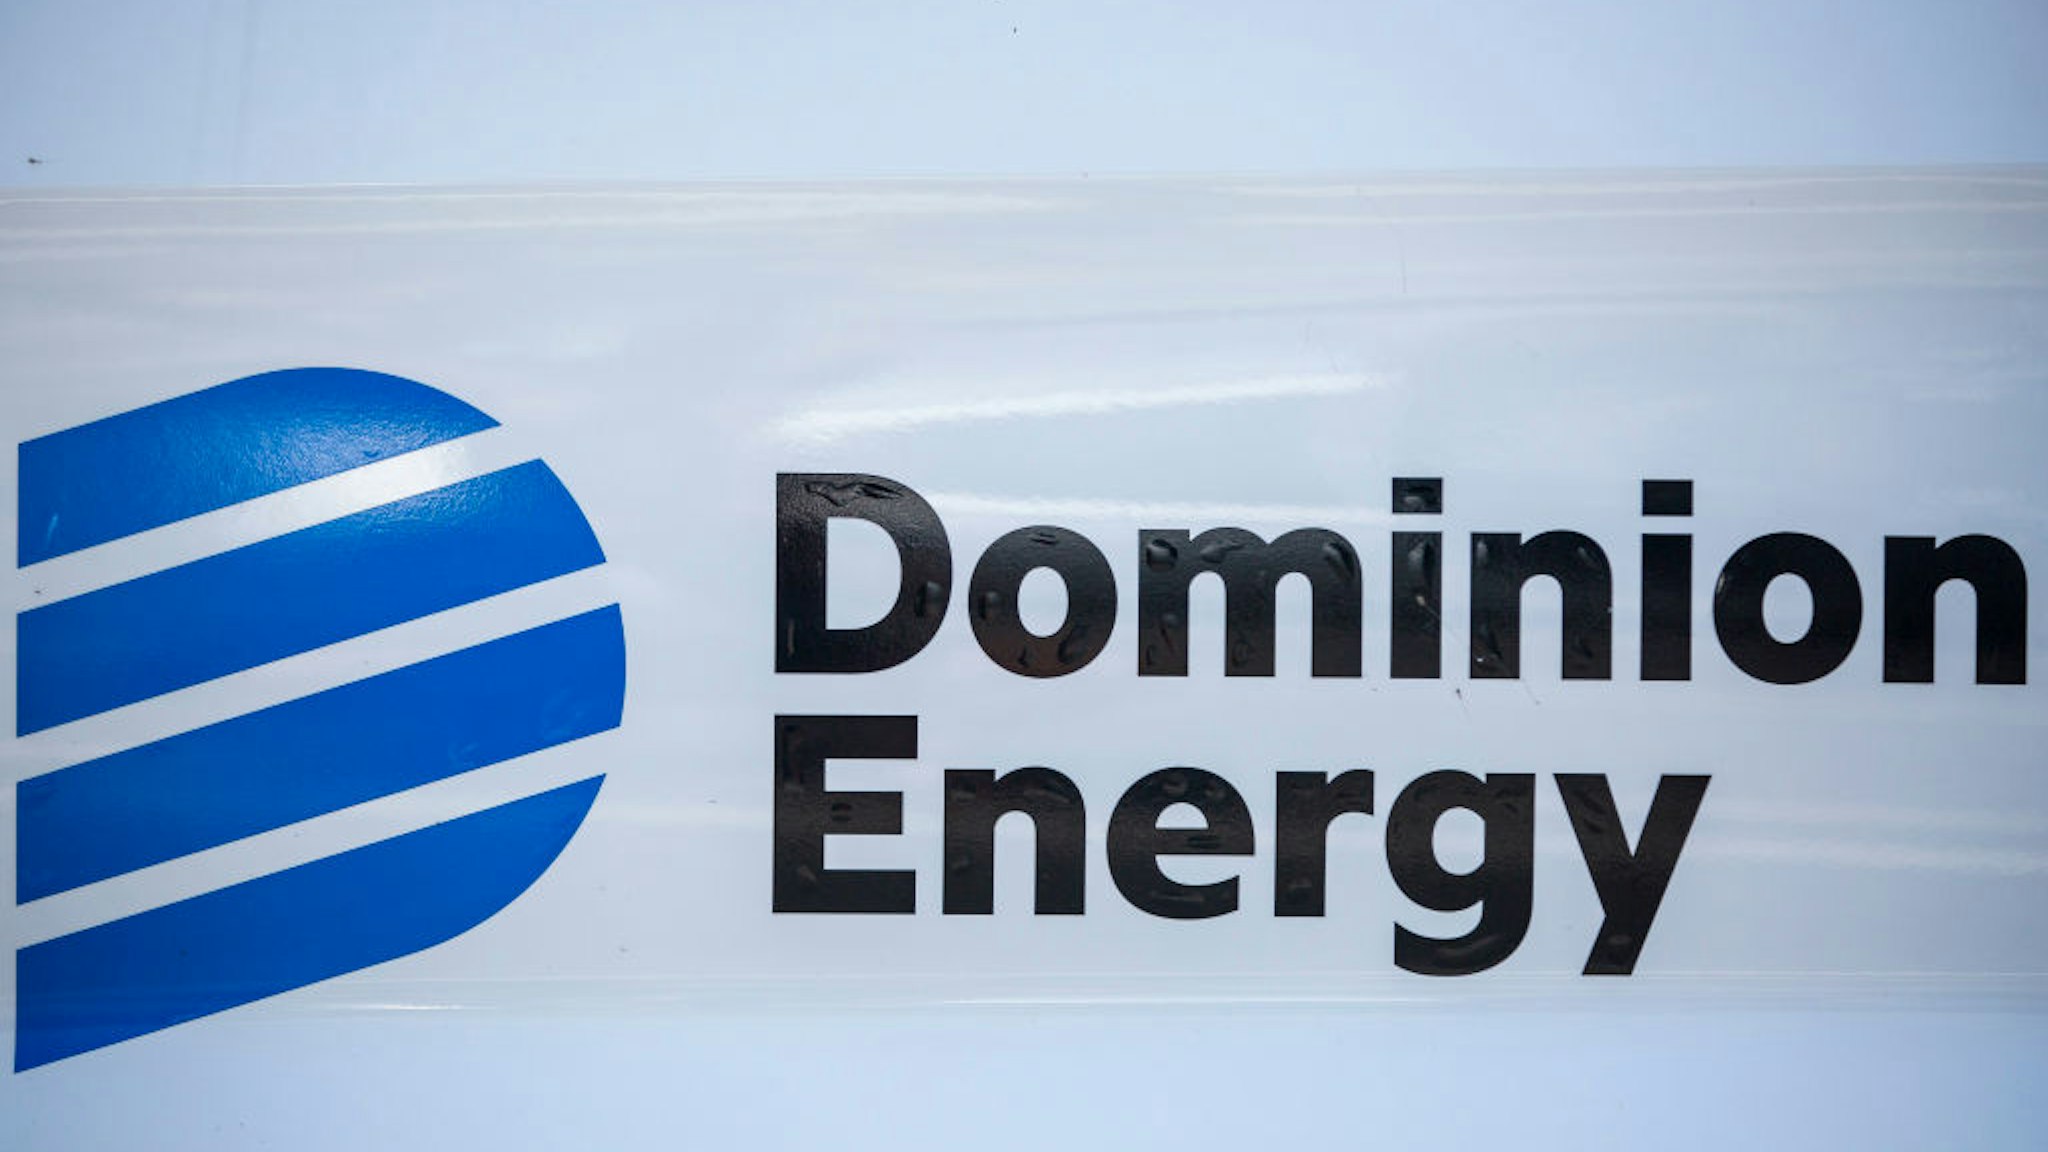 A logo on a Domionion Energy company car is pictured on July 6, 2020 in Richmond, Virginia.